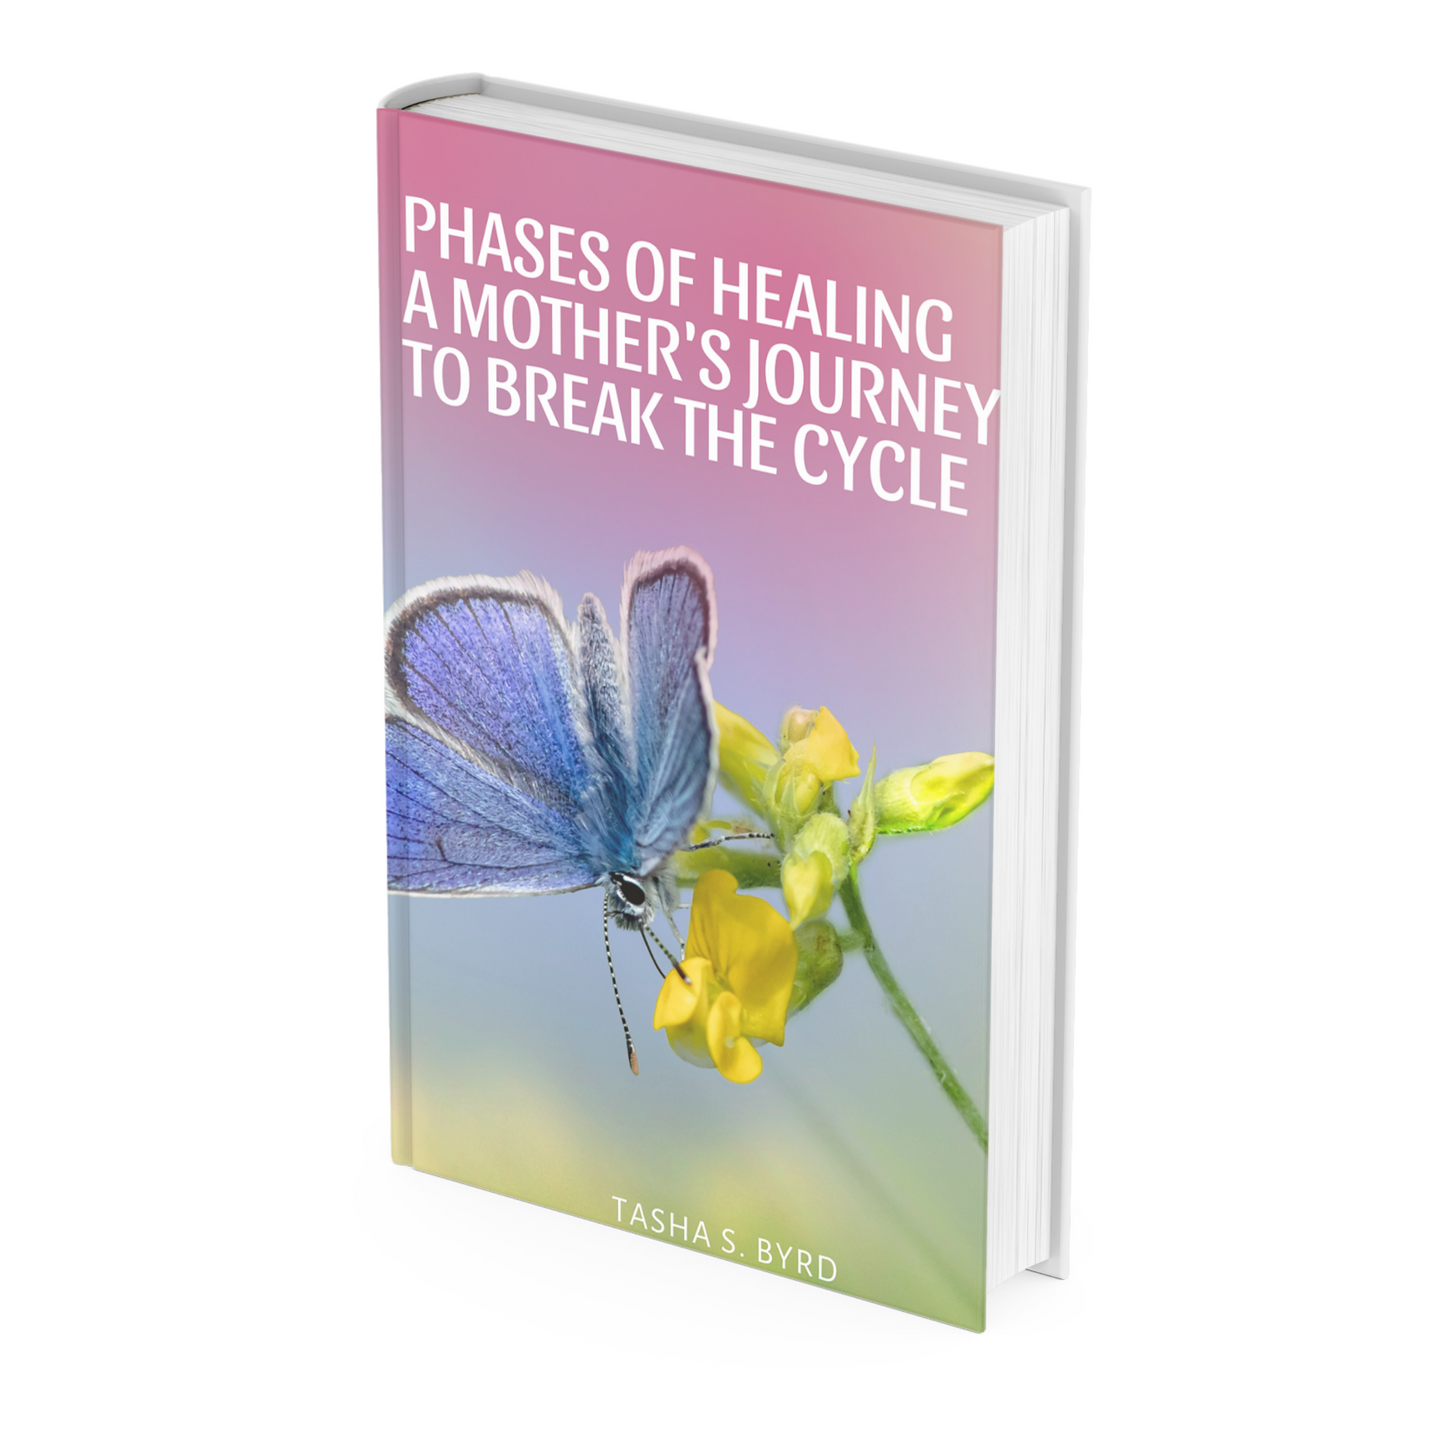 PHASES OF HEALING A MOTHER'S JOURNEY TO BREAK THE CYCLE